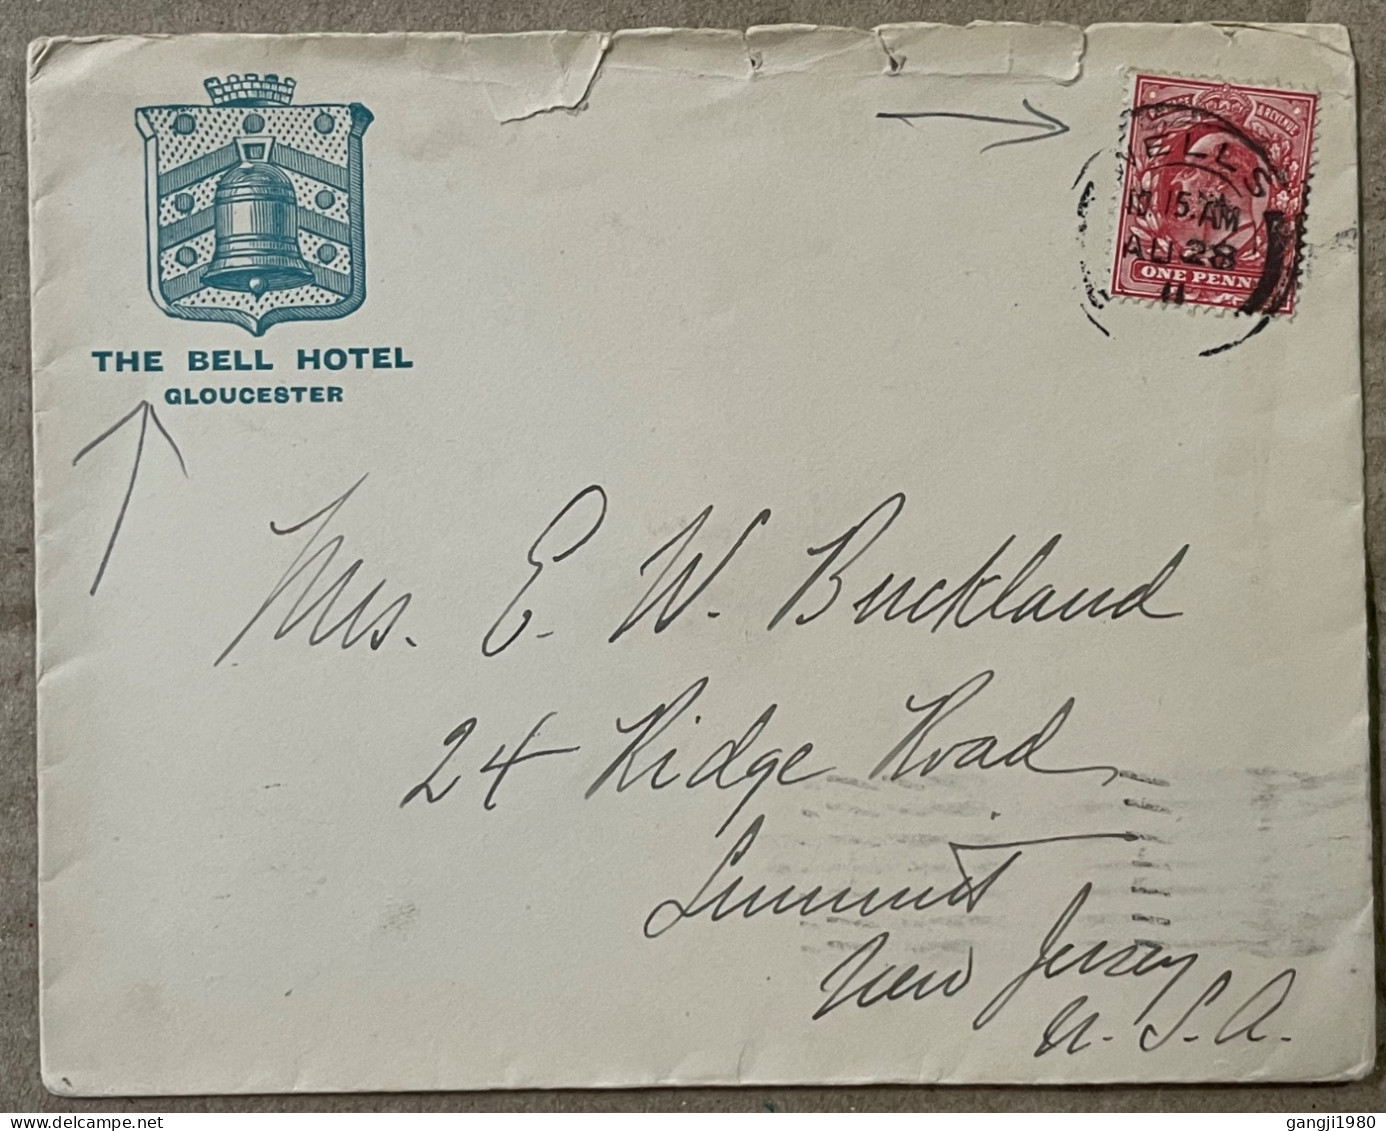 GREAT BRITAIN 1911, ADVERTISING THE BELL HOTEL GLOUCESTER, EDWARD STAMP, COVER USED TO USA, WELLS & SUMMIT CITY CANCEL. - Lettres & Documents